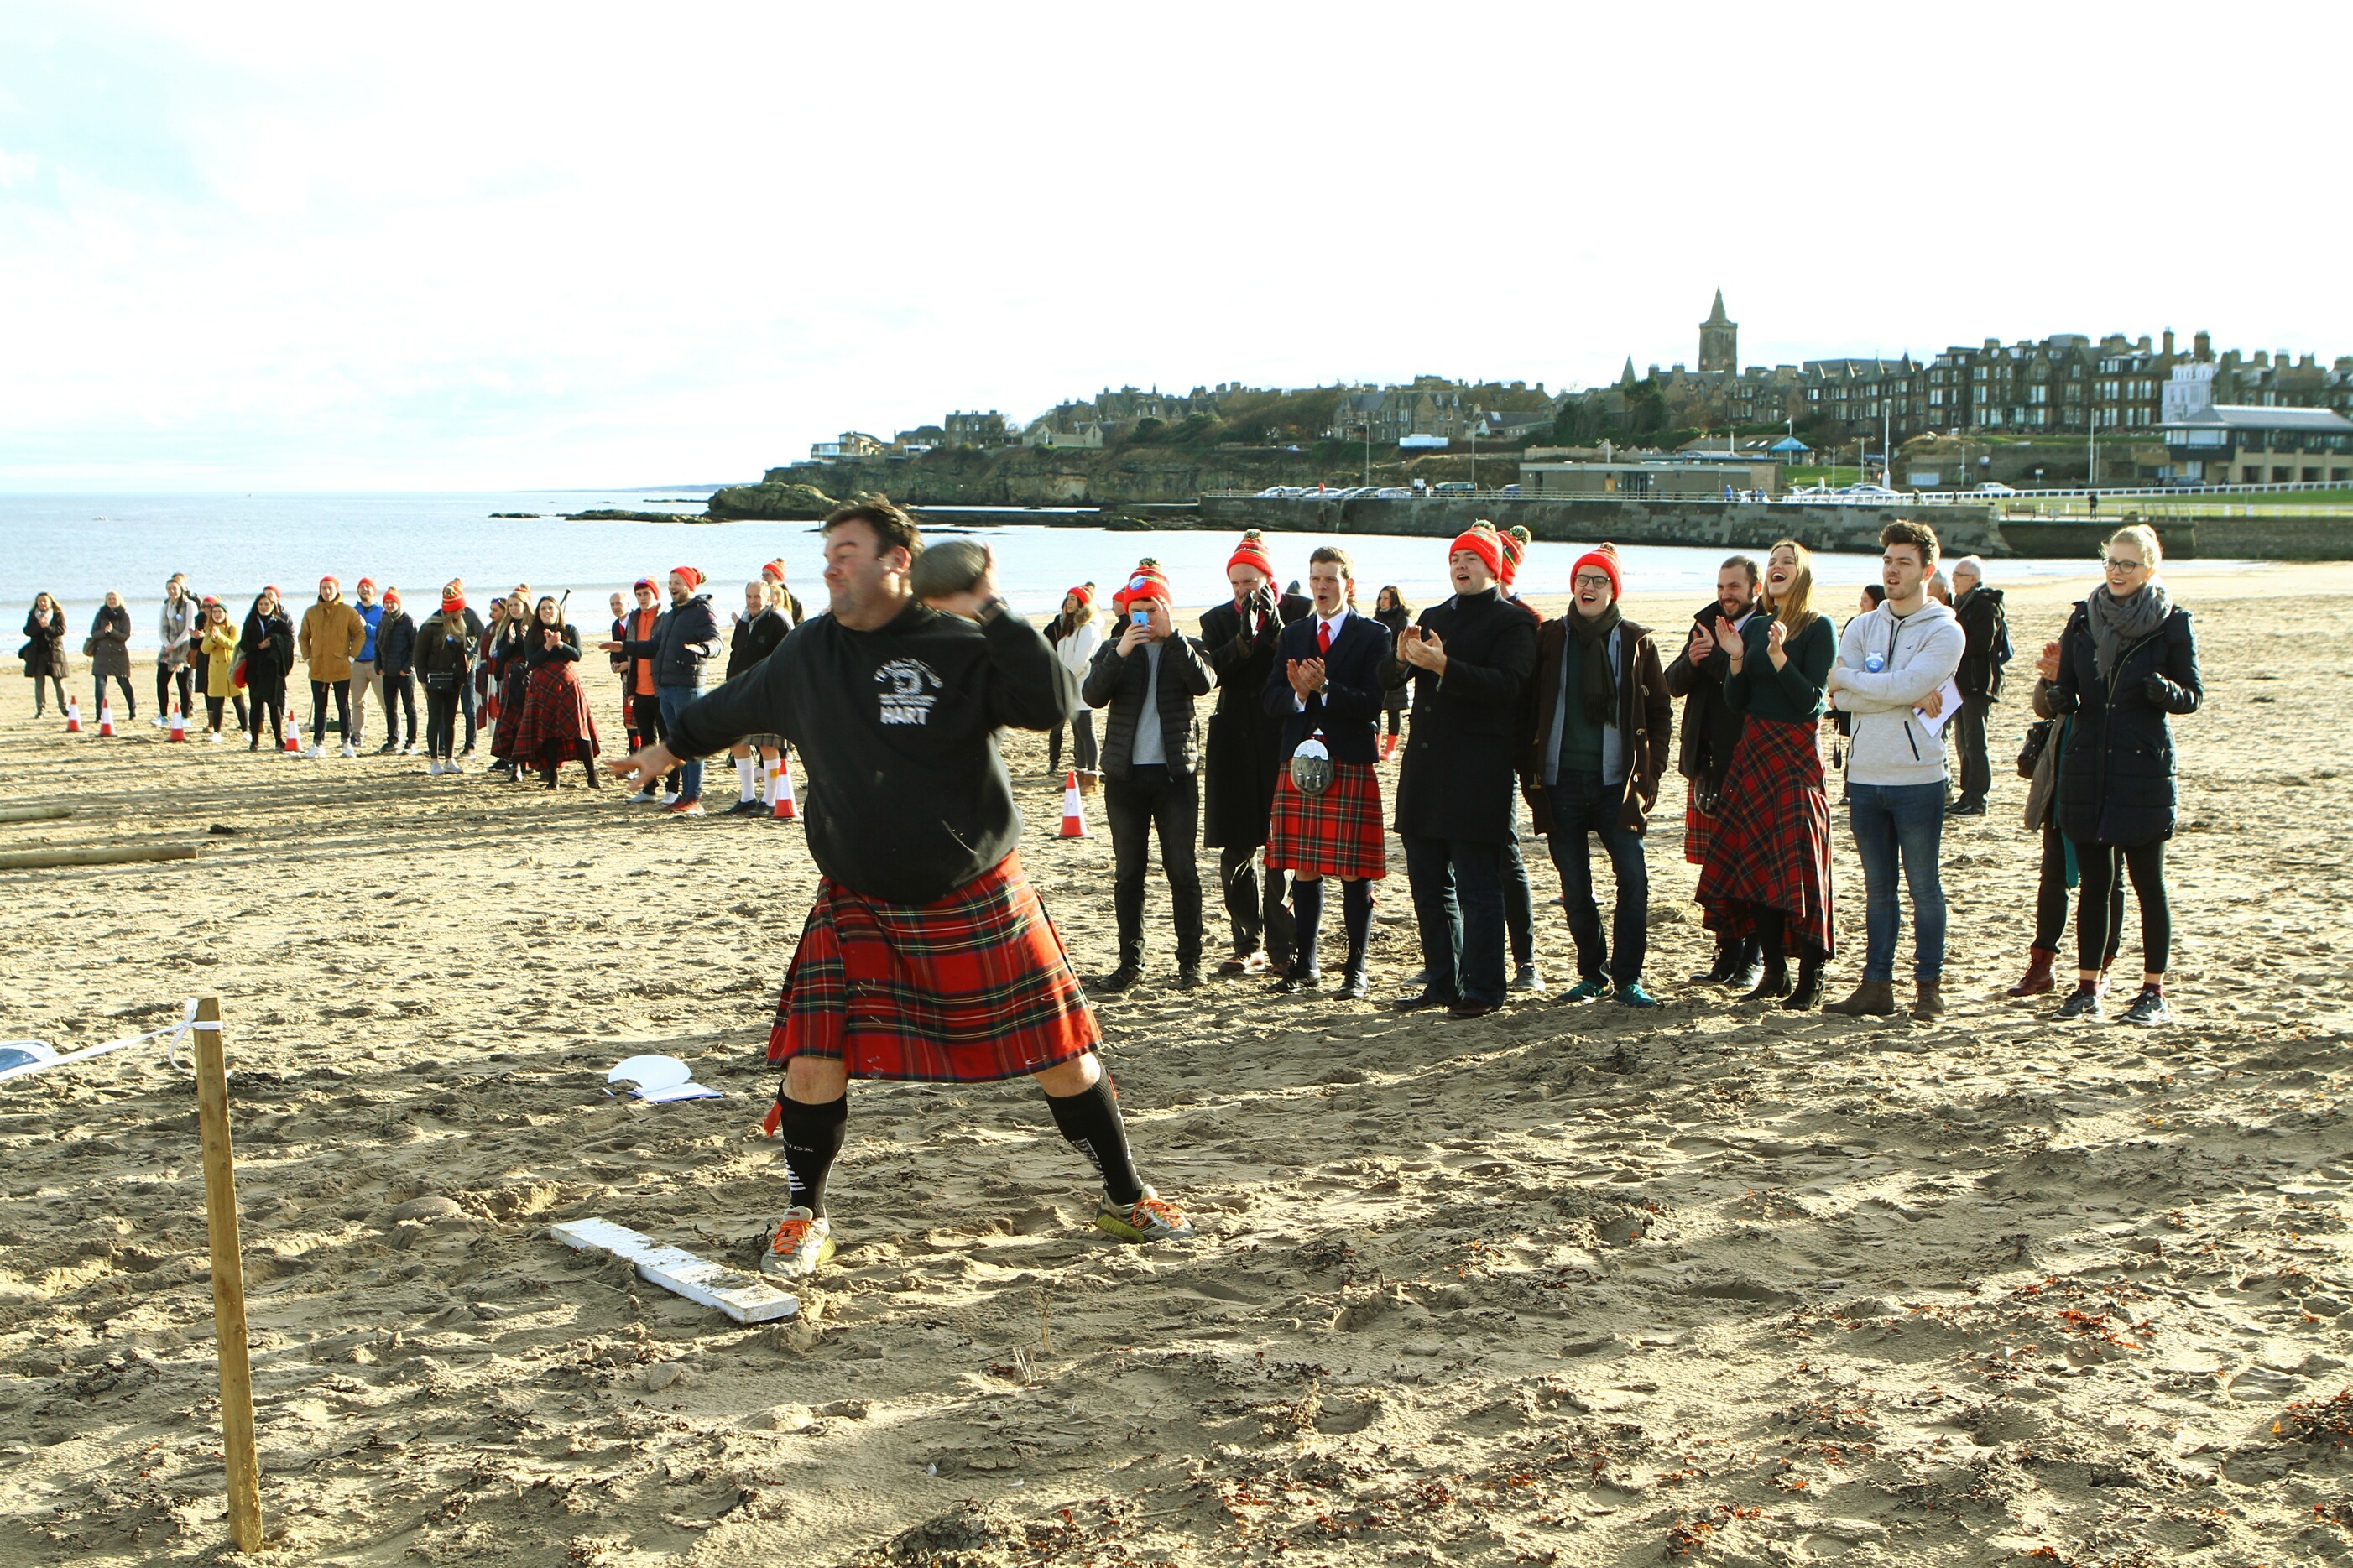 Andrews taking part in a Highland Games event on the West Sands.